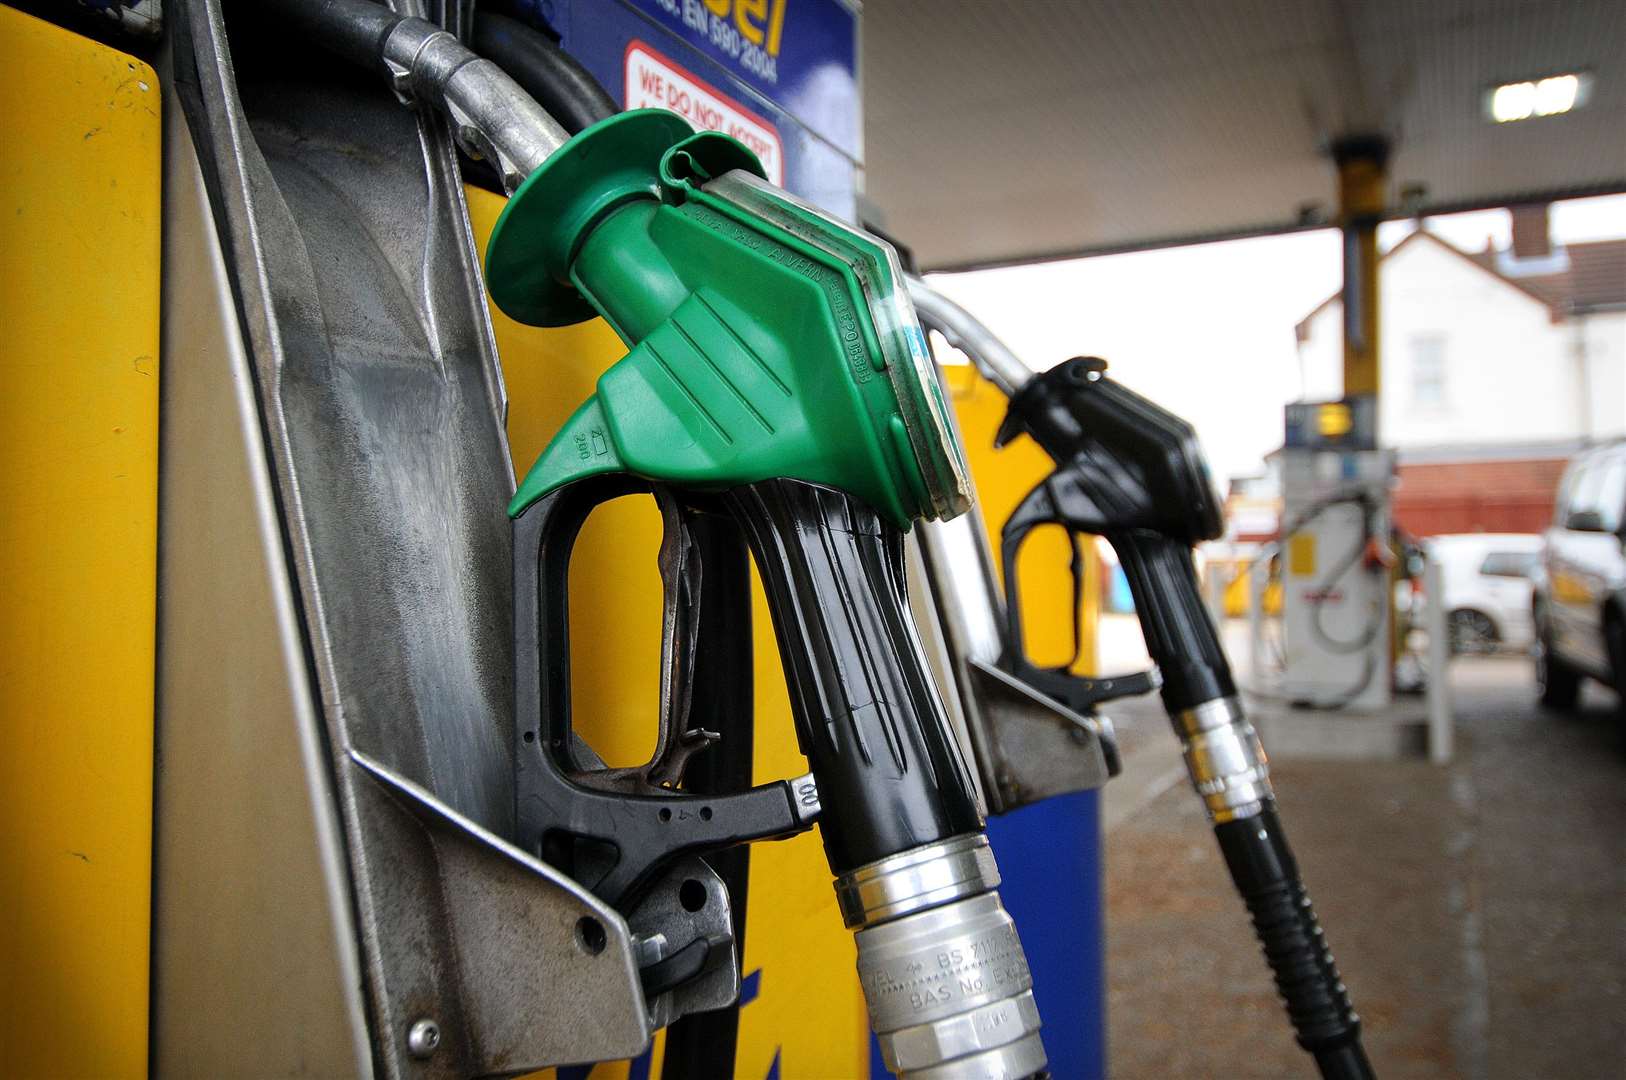 Fuel prices are rising at an alarming rate